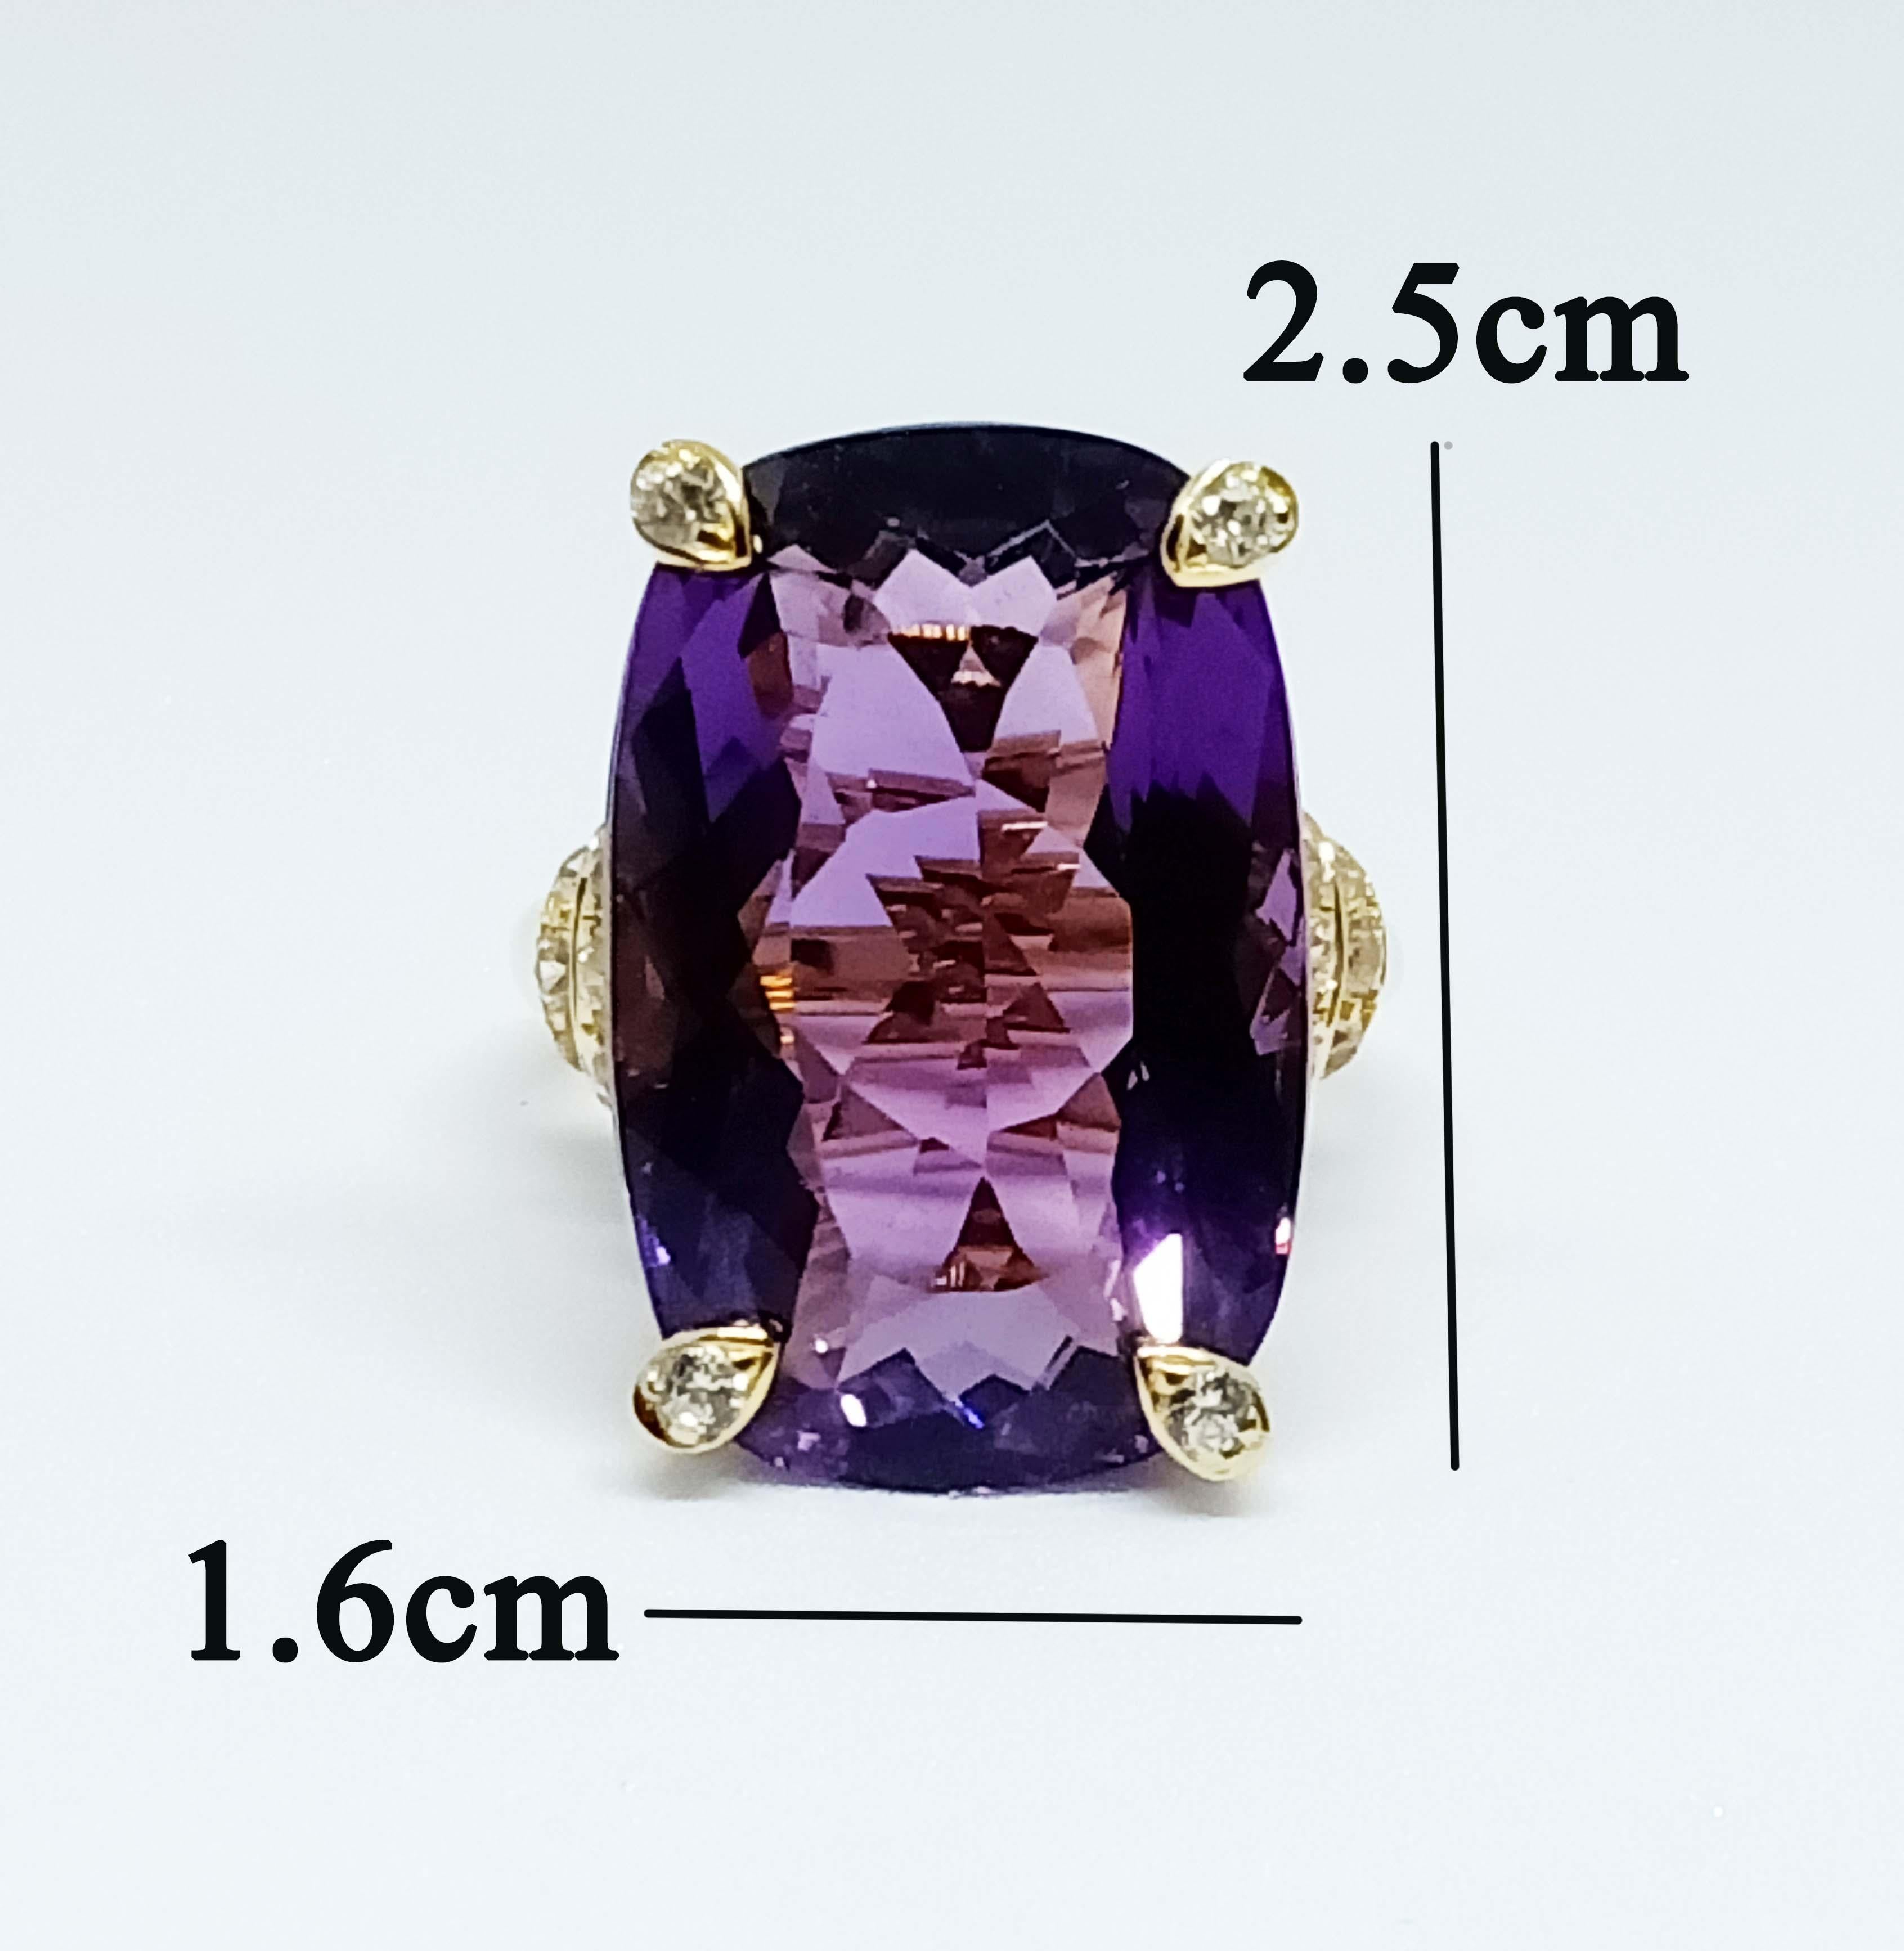 Amethyst Cushion 25 x 16 mm. (25.82 cts.)
White Zircon 2.0 mm. 20 pcs.
Sterling Silver on 18K Gold plated  
Size 8 US. 